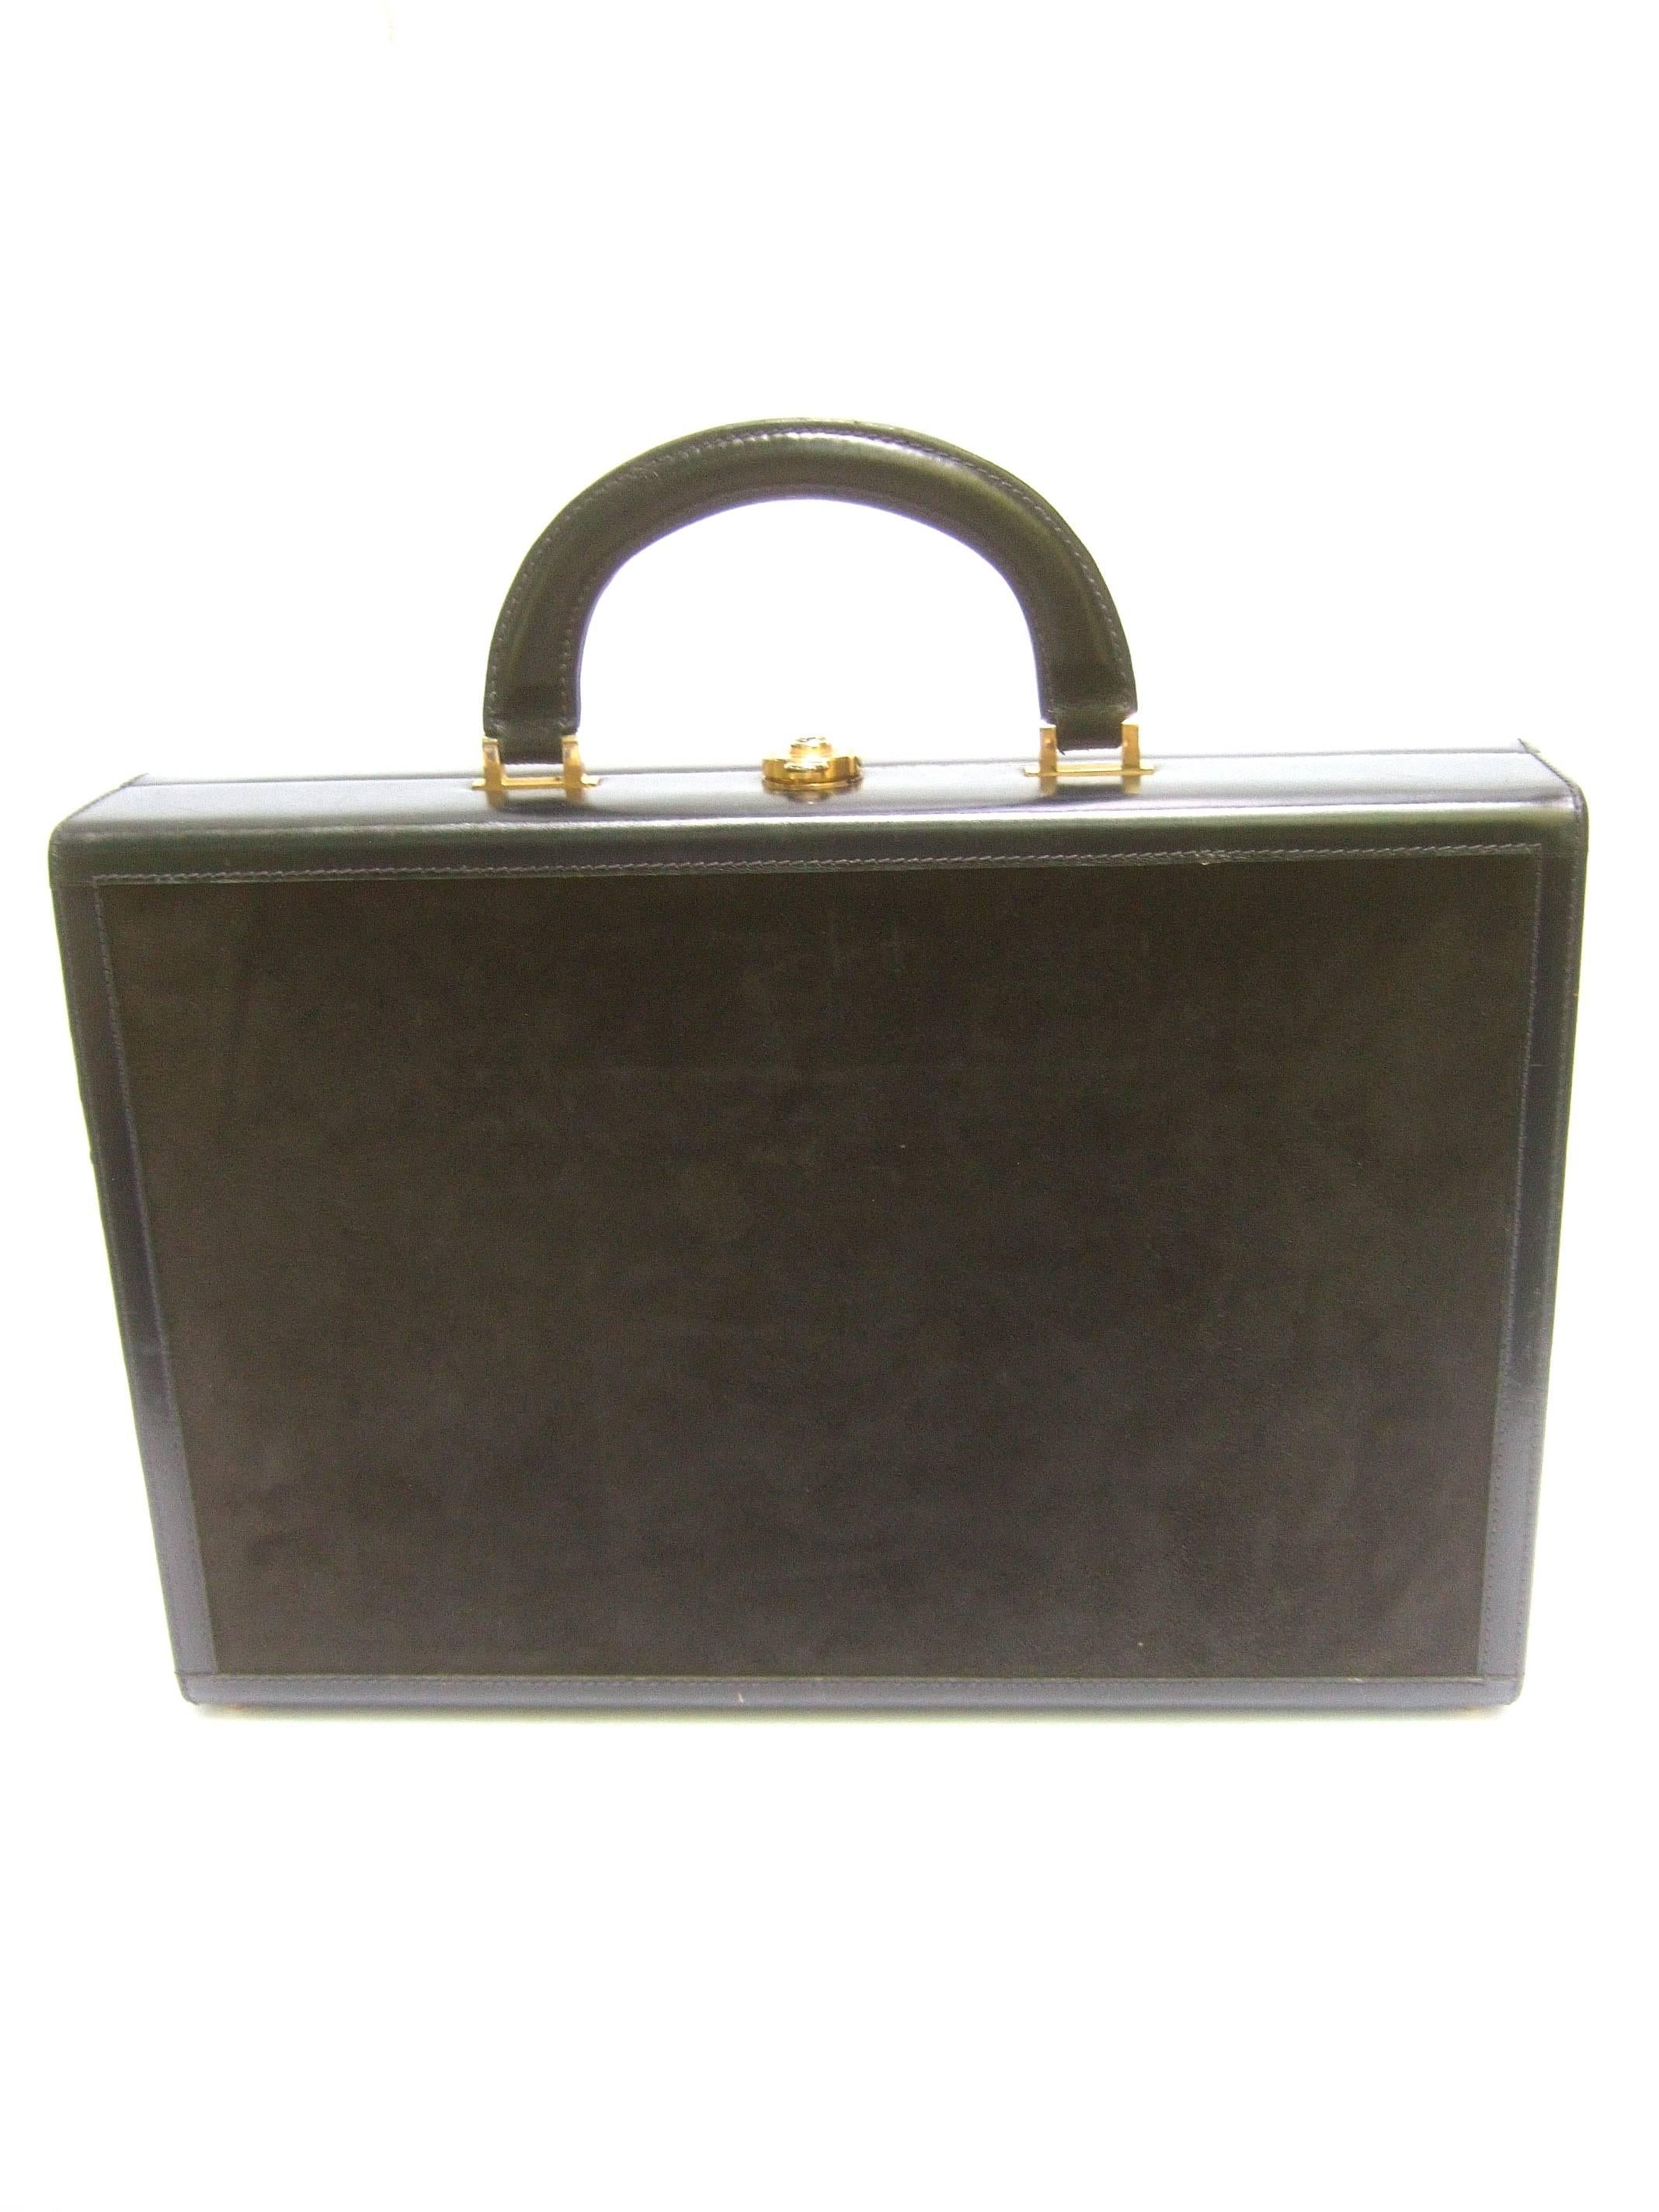 Gucci Luxurious Black Suede & Leather Briefcase circa 1970s 5